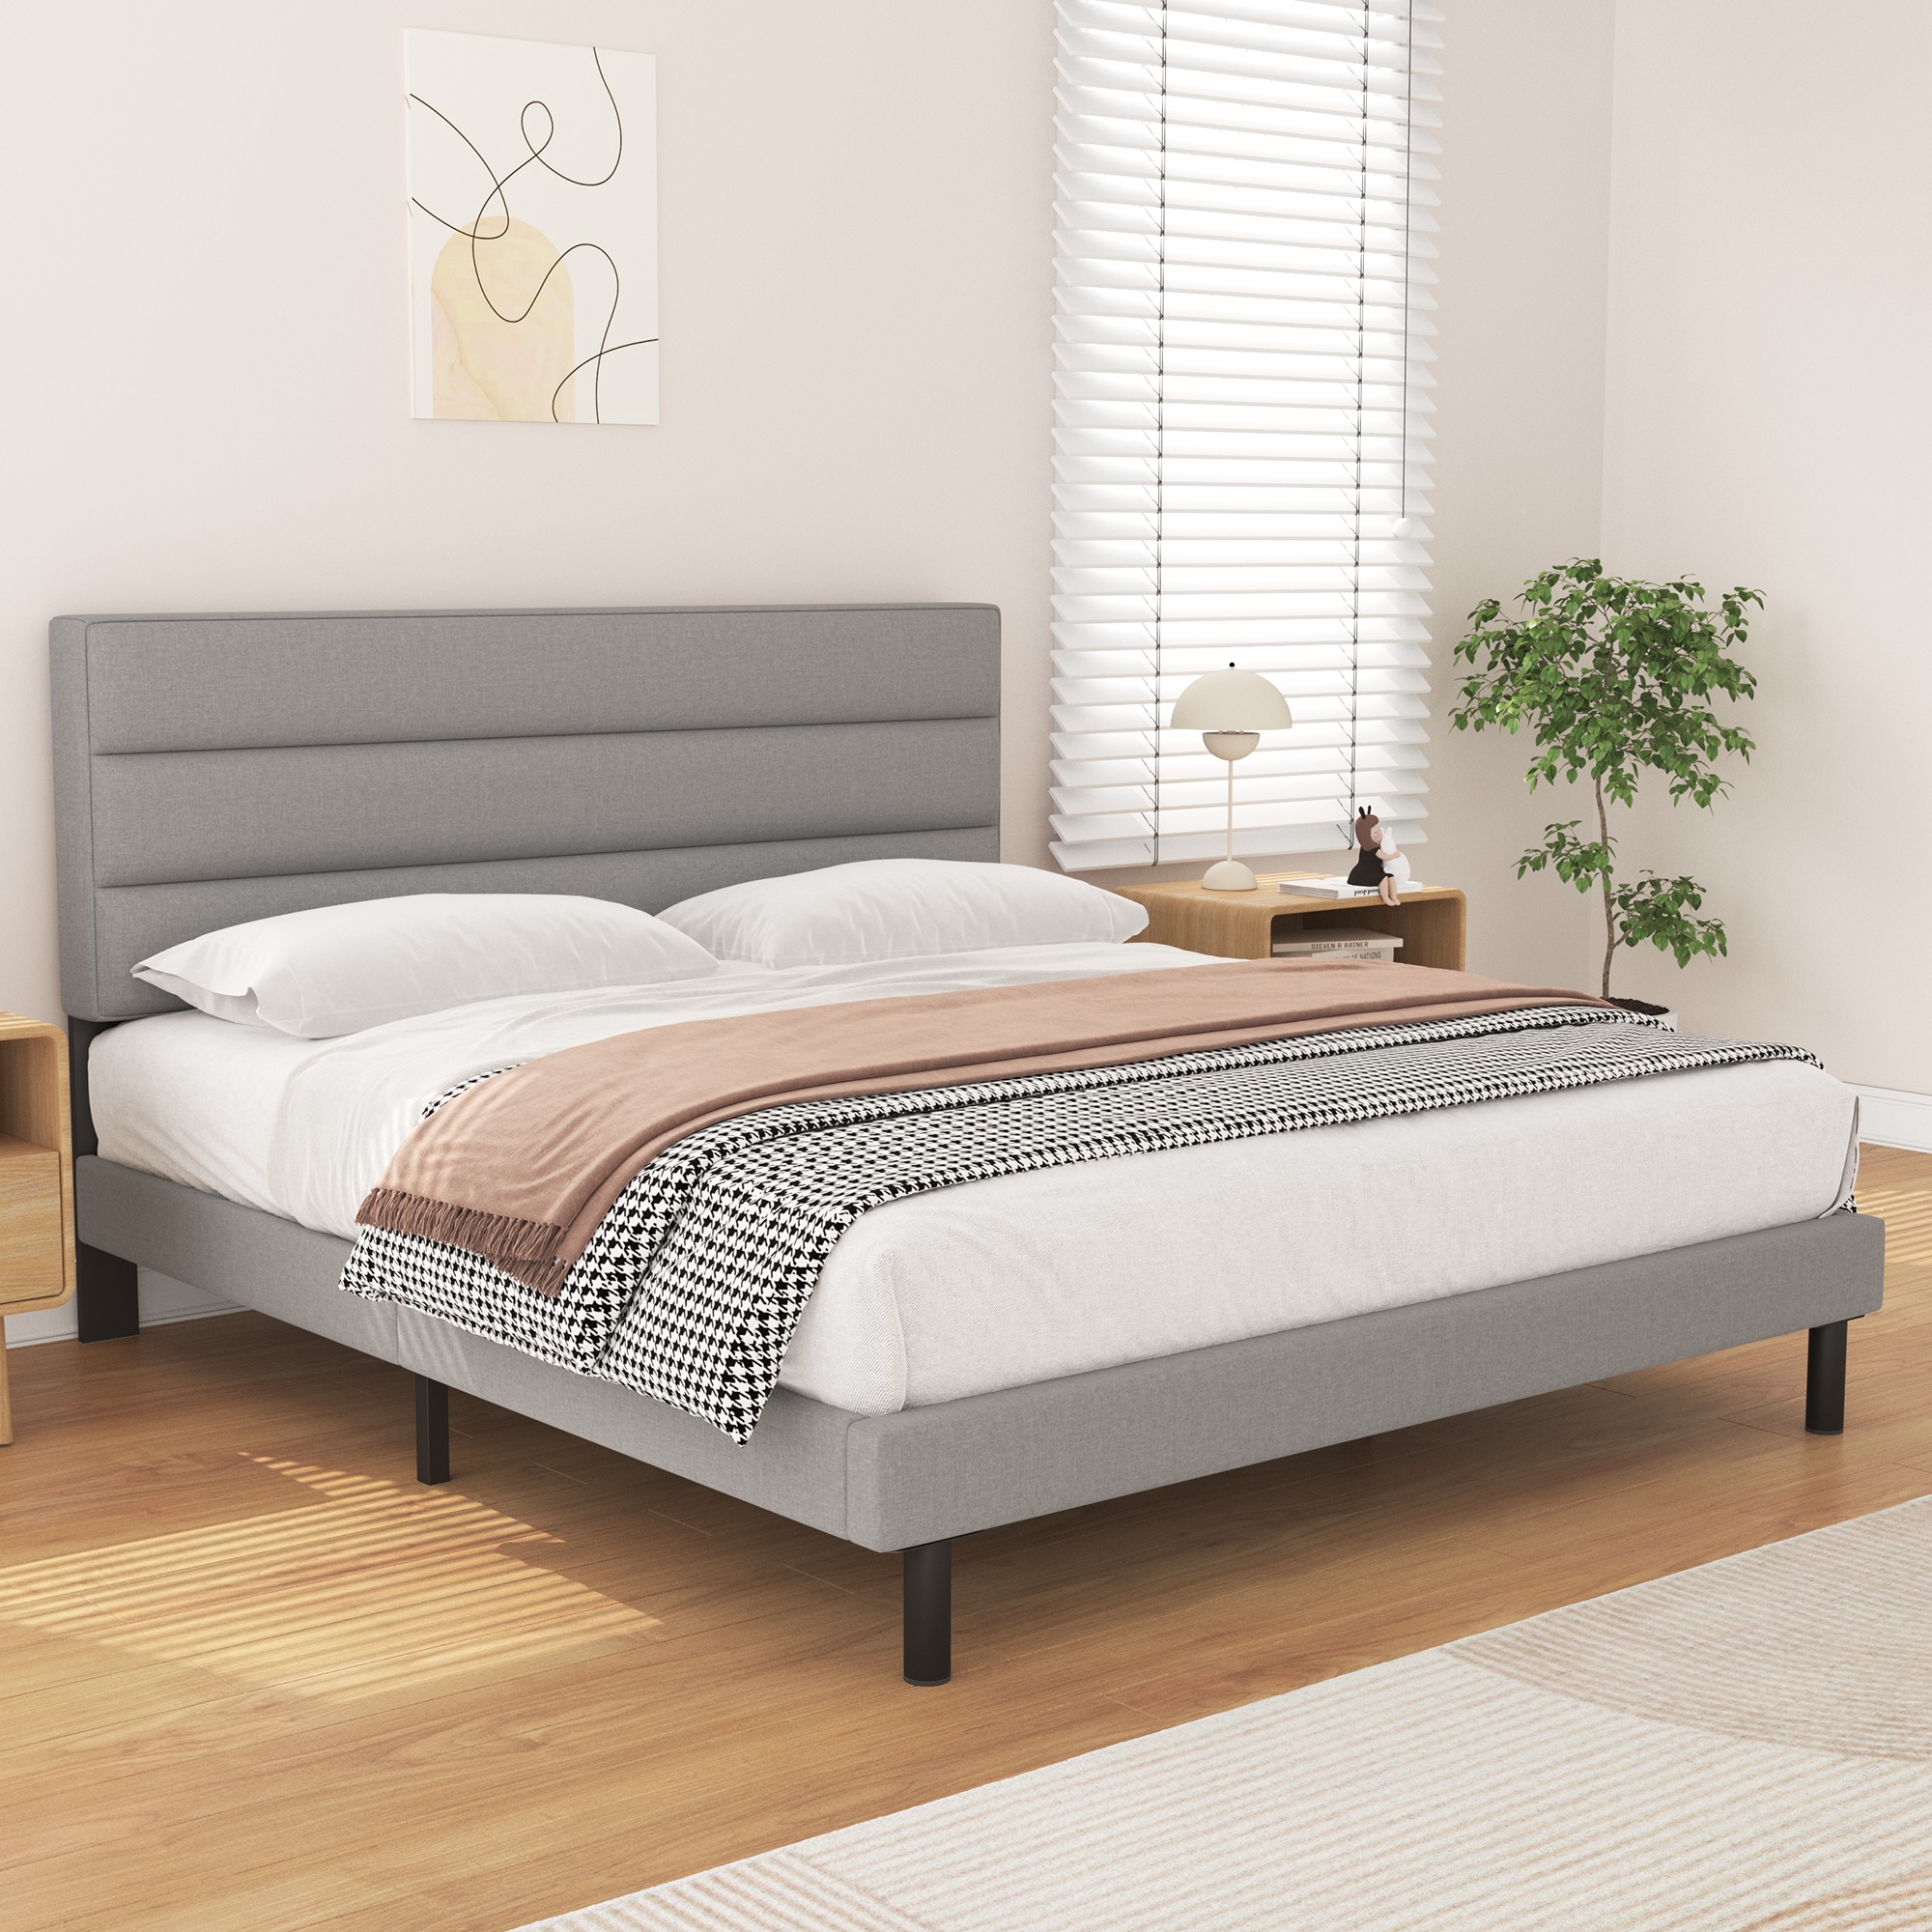 Queen Bed Frame, HAIIDE Queen Size Platform Bed with Wingback Fabric Upholstered Headboard, Light Gray - image 2 of 8